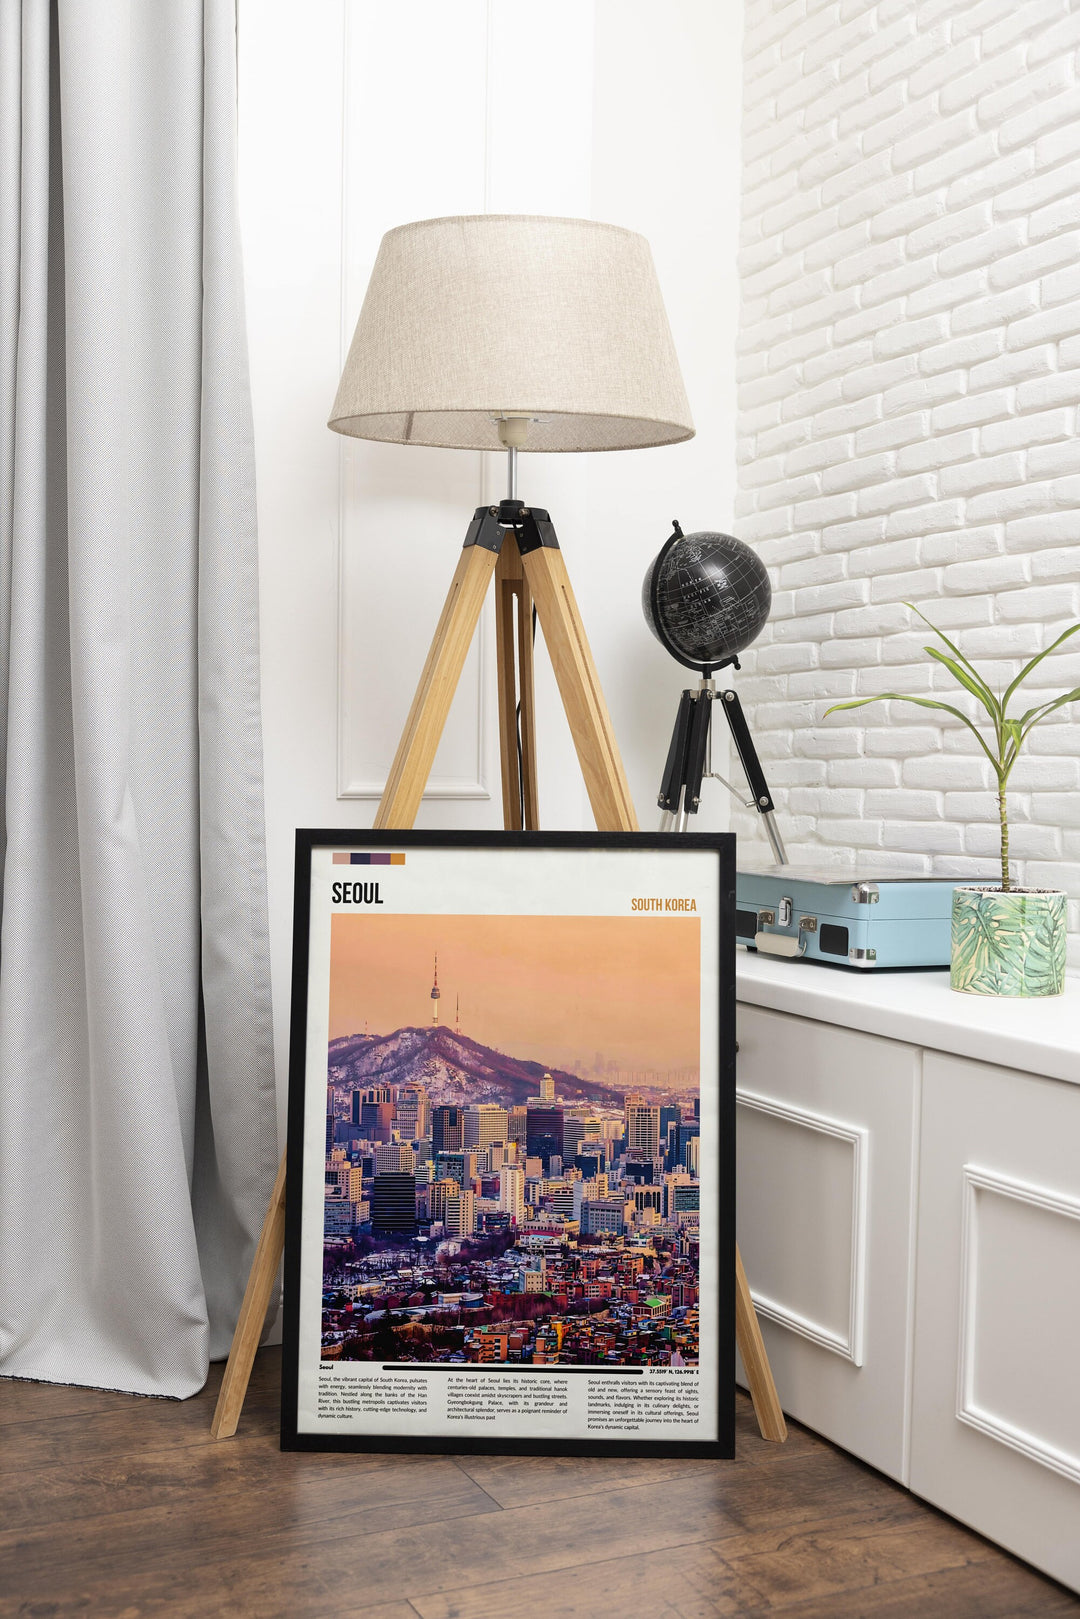 a picture of a city is on a tripod next to a lamp